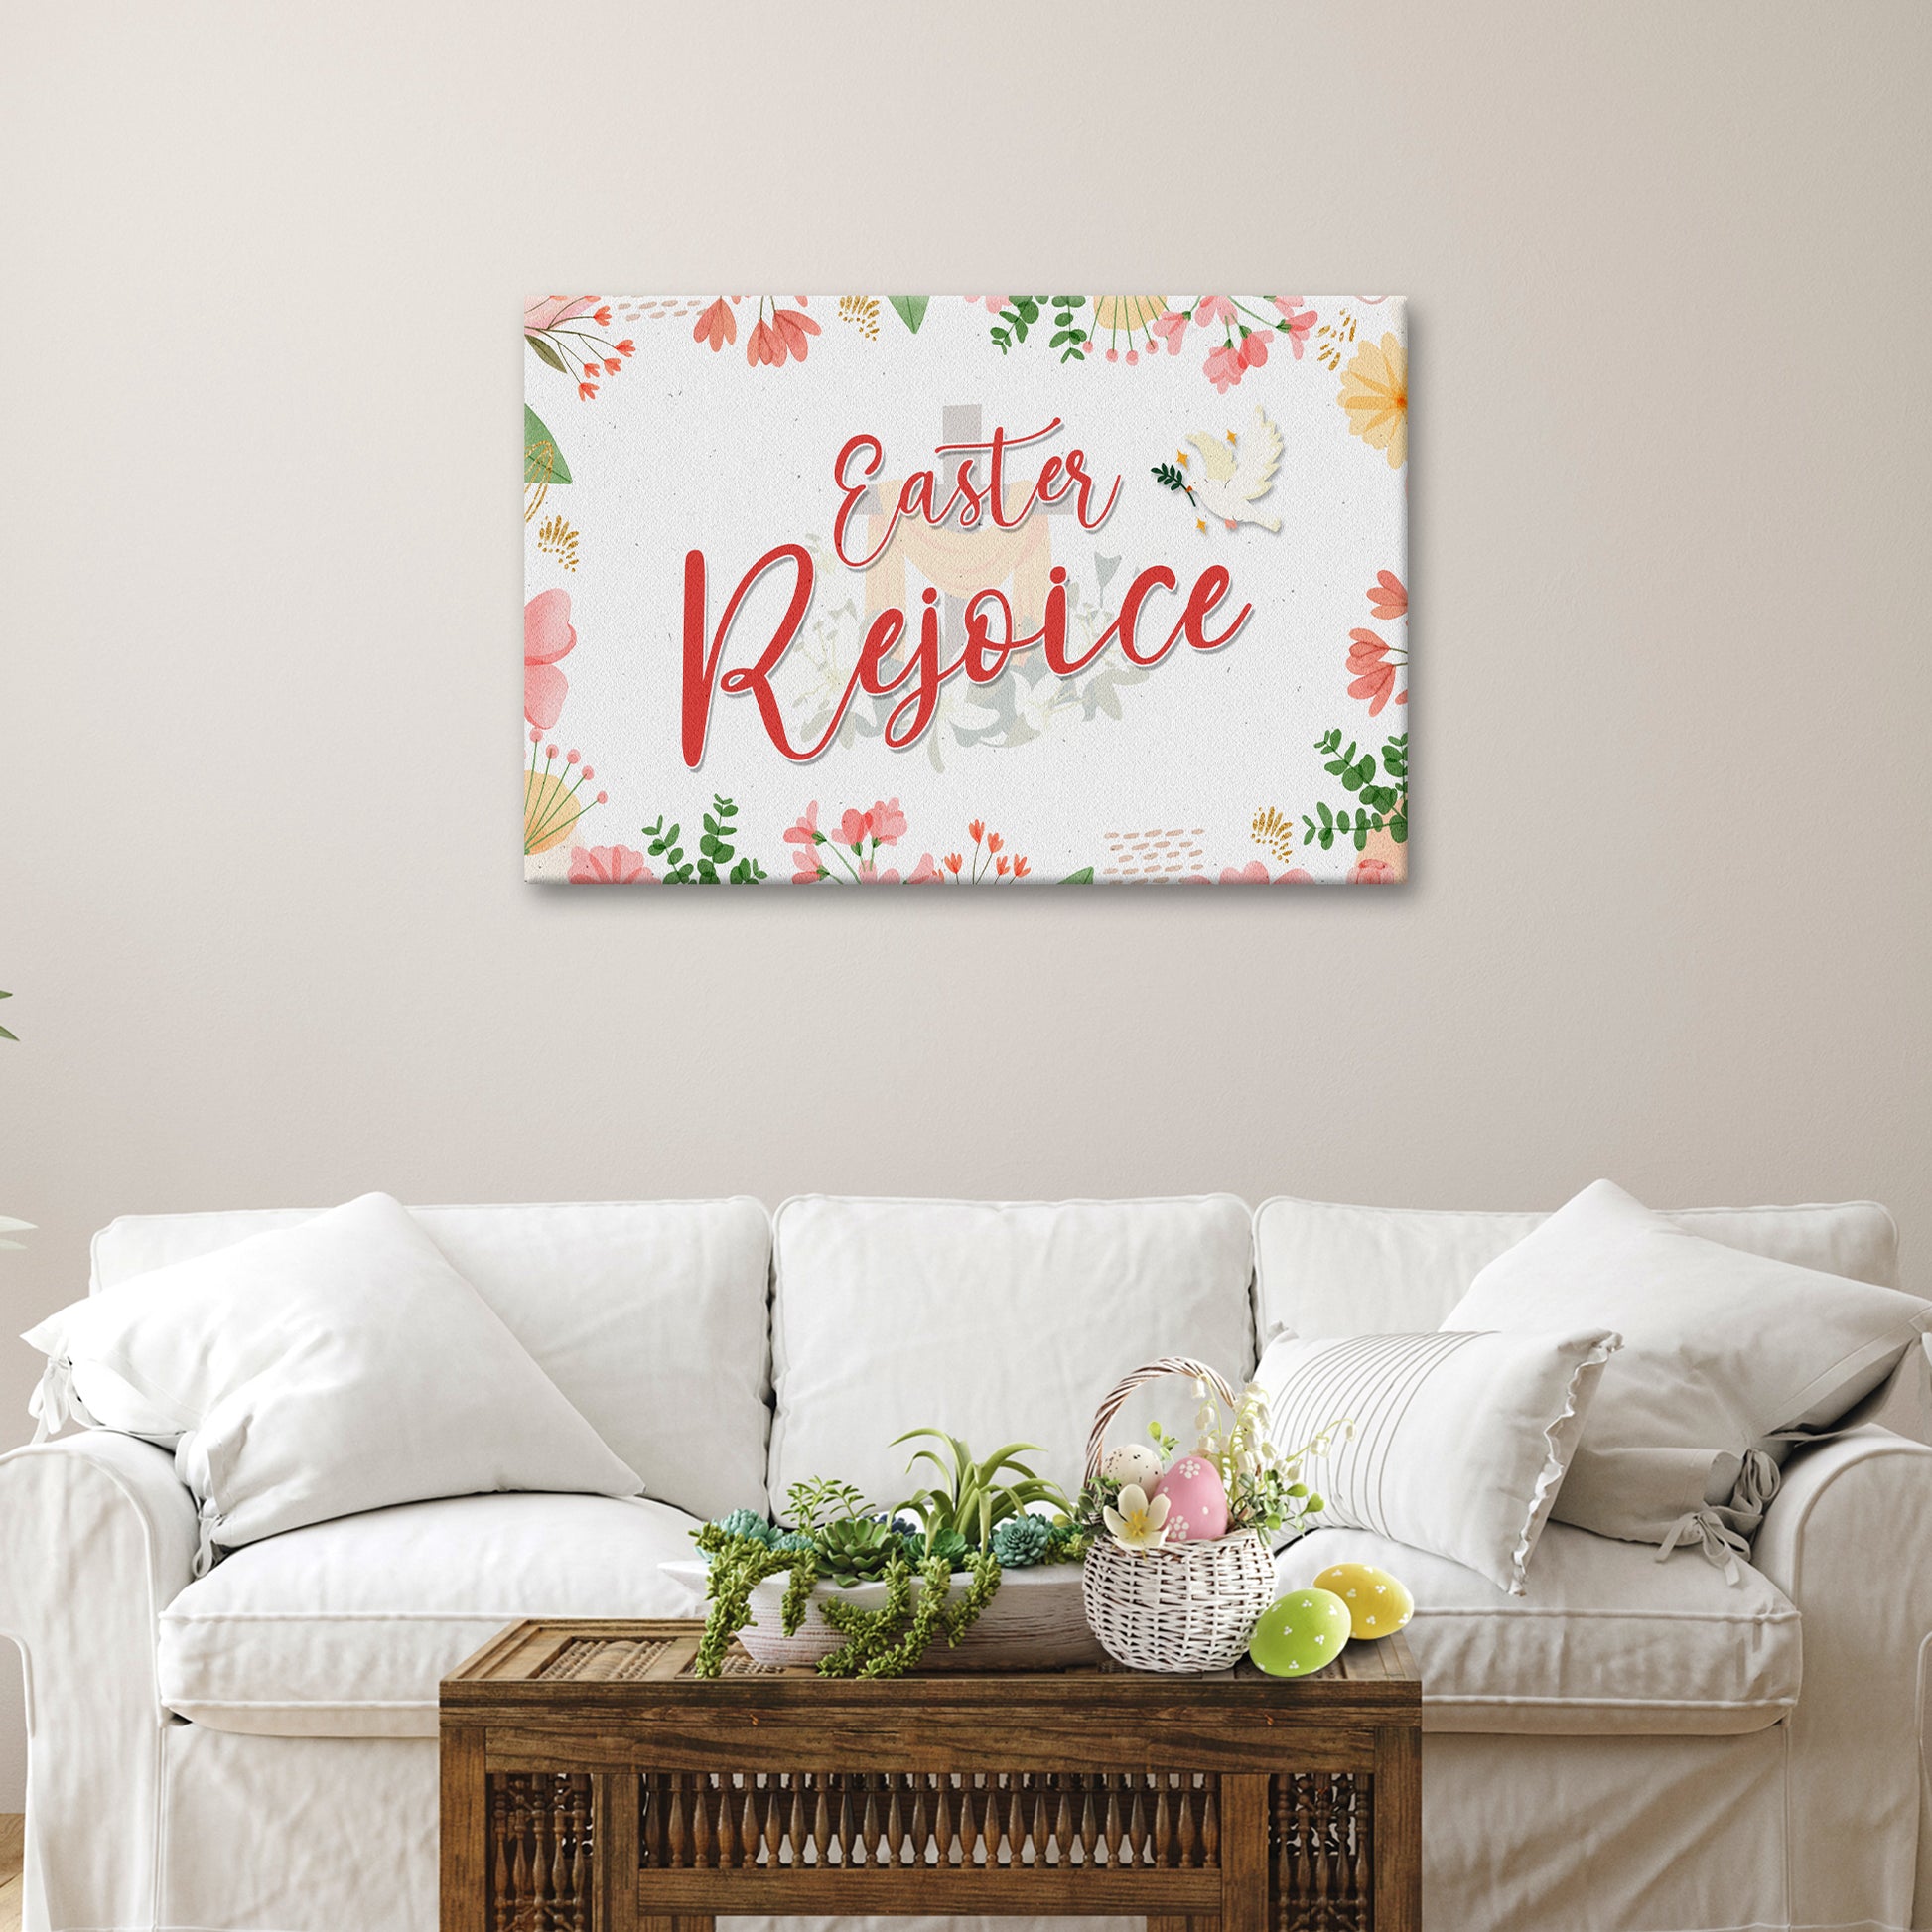 Easter Rejoice Sign - Image by Tailored Canvases